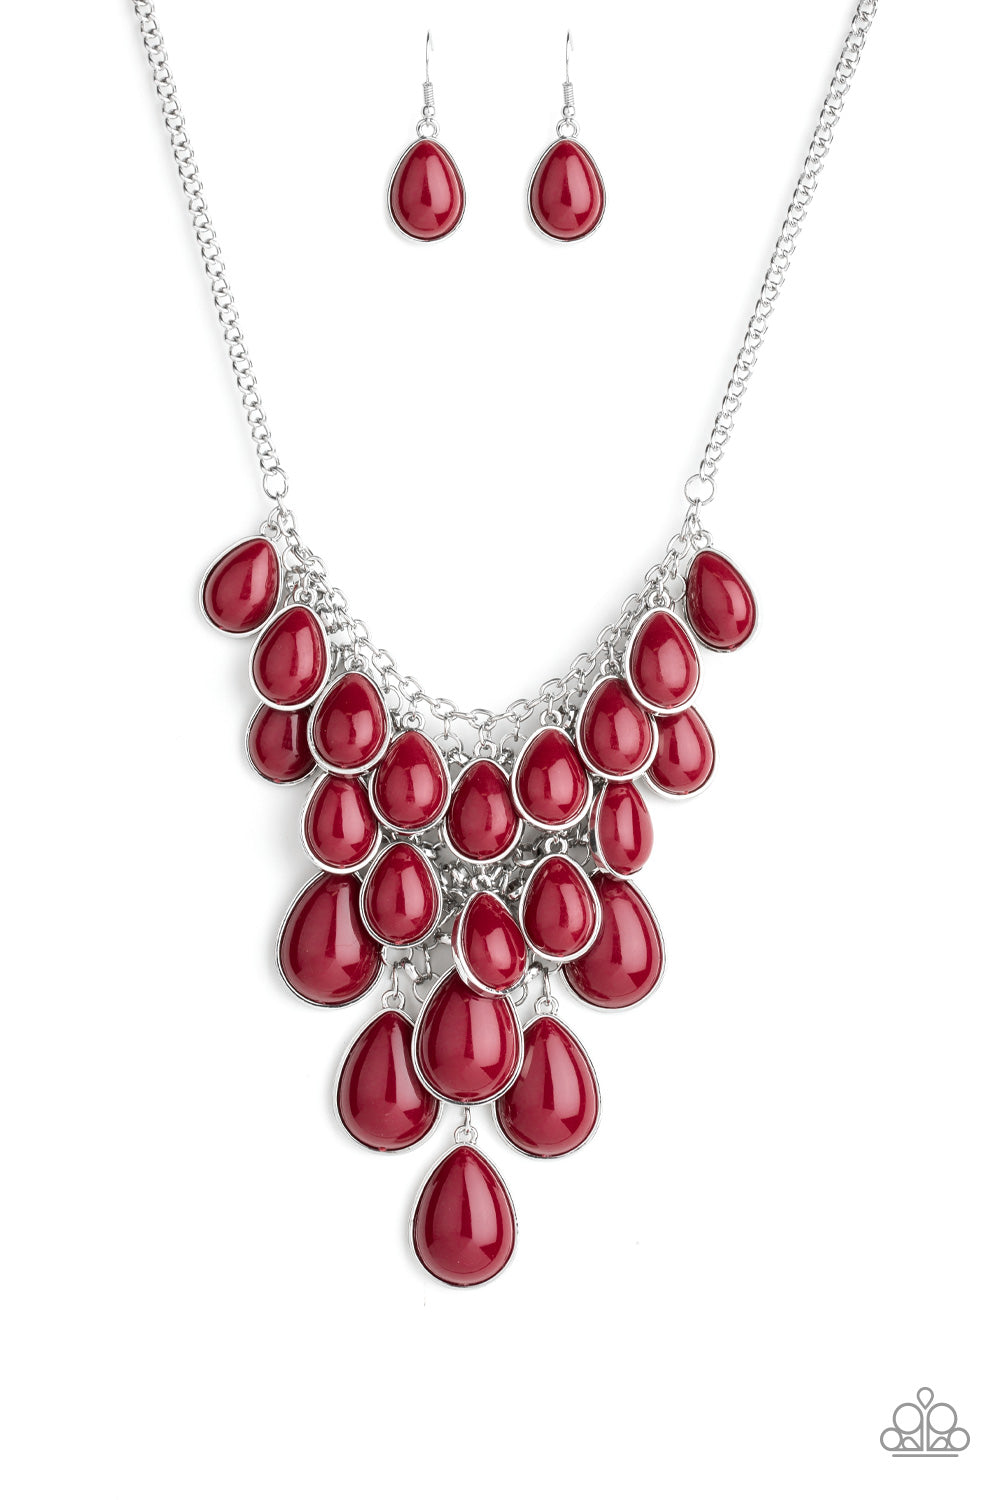 five-dollar-jewelry-shop-til-you-teardrop-red-paparazzi-accessories